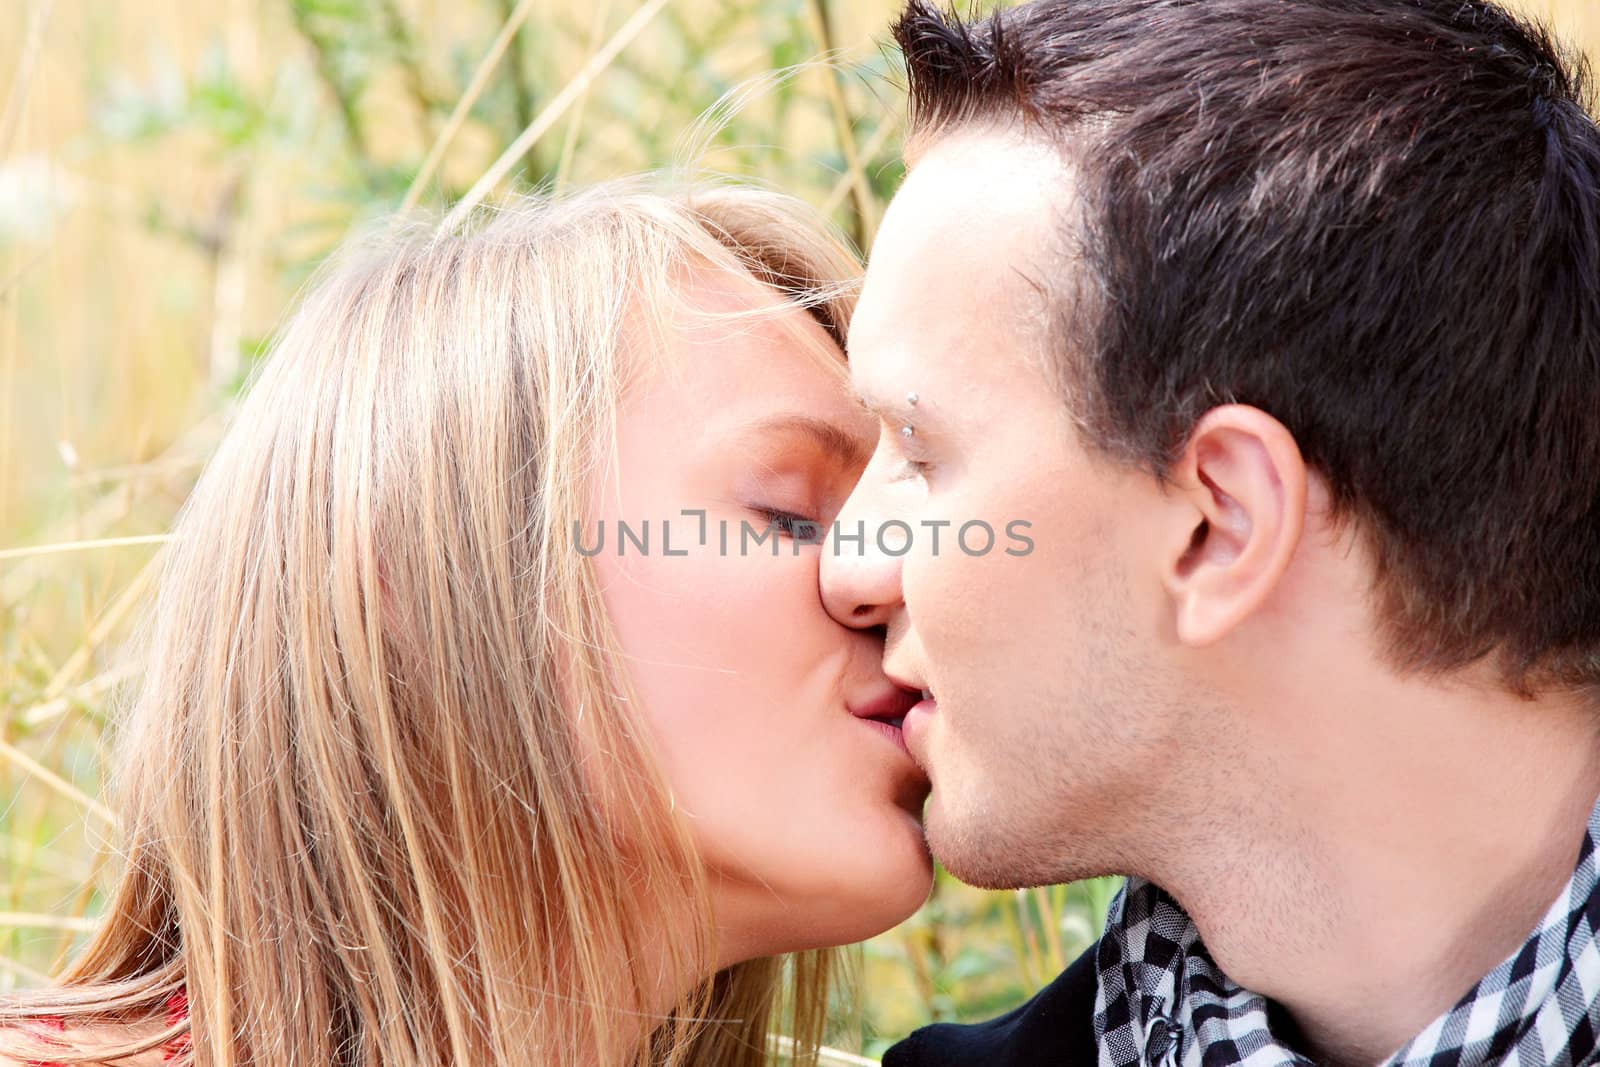 Young couple in grain field - kissing